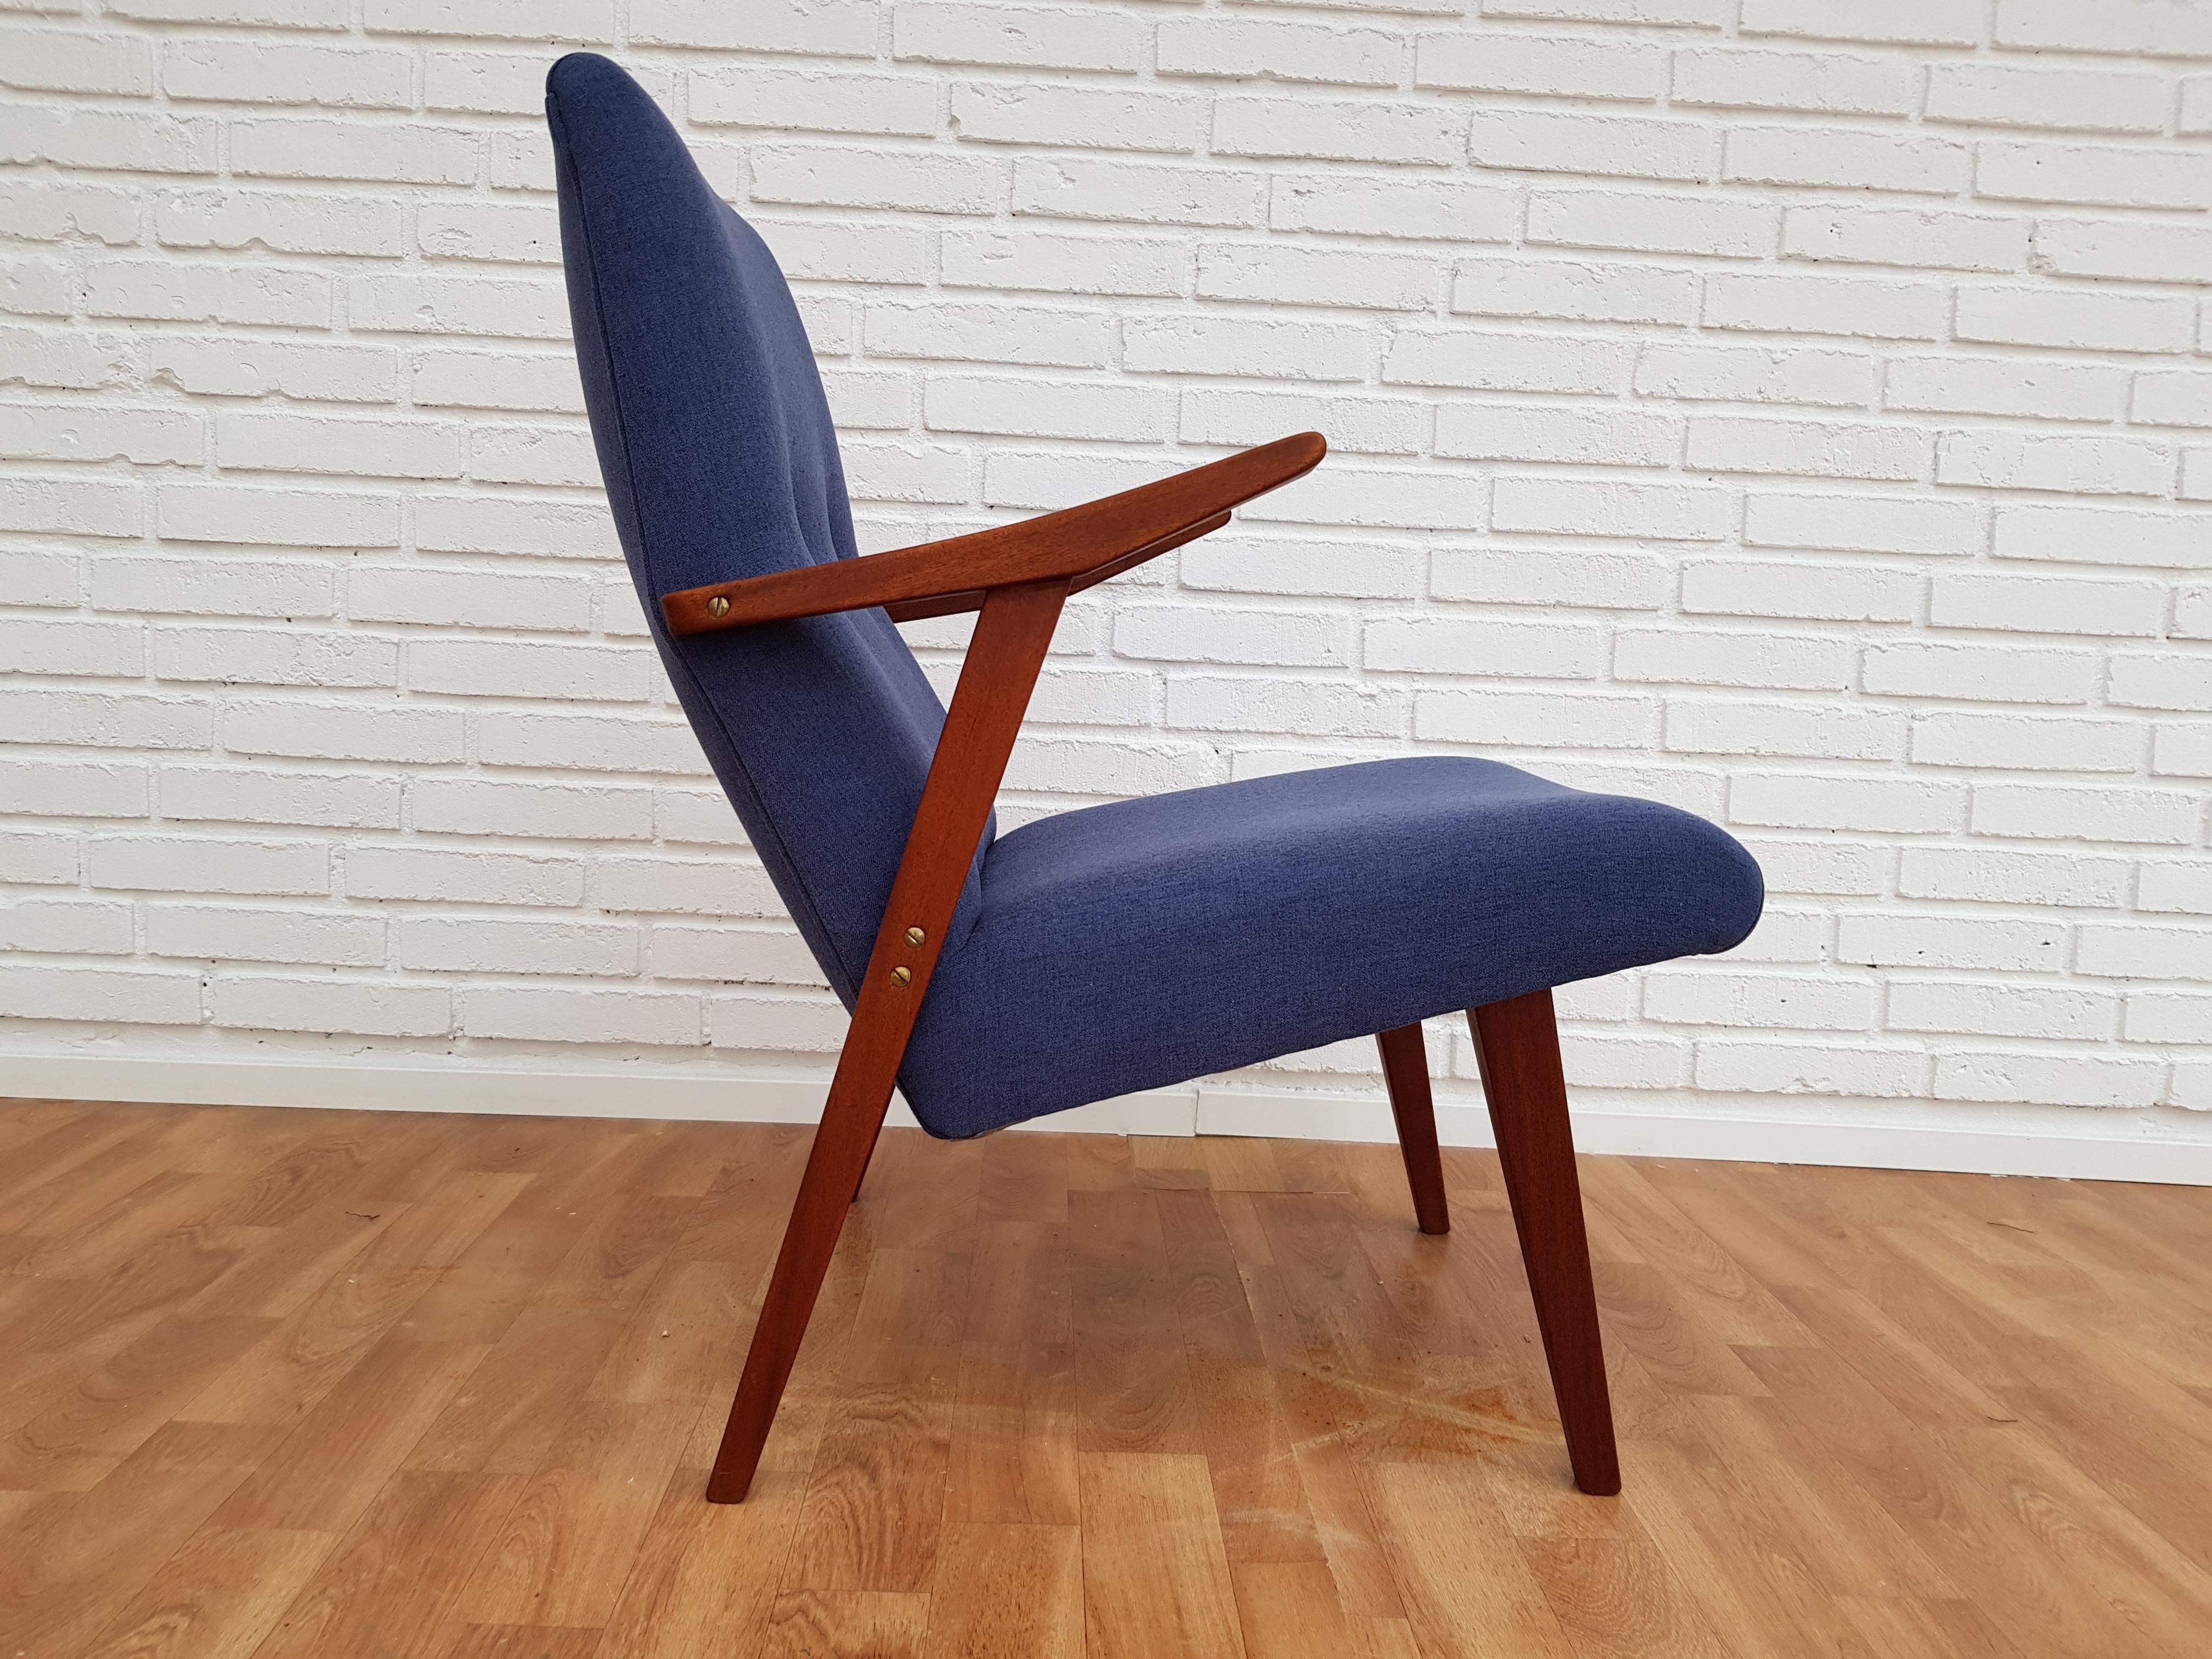 Scandinavian design, armchair. Produced in about 1960. Teakwood legs and armrests. Completely restored by craftsman, furniture upholsterer at Retro Møbler Galleri. Brand new padding with natural coconut mat. New reupholstered in quality blue